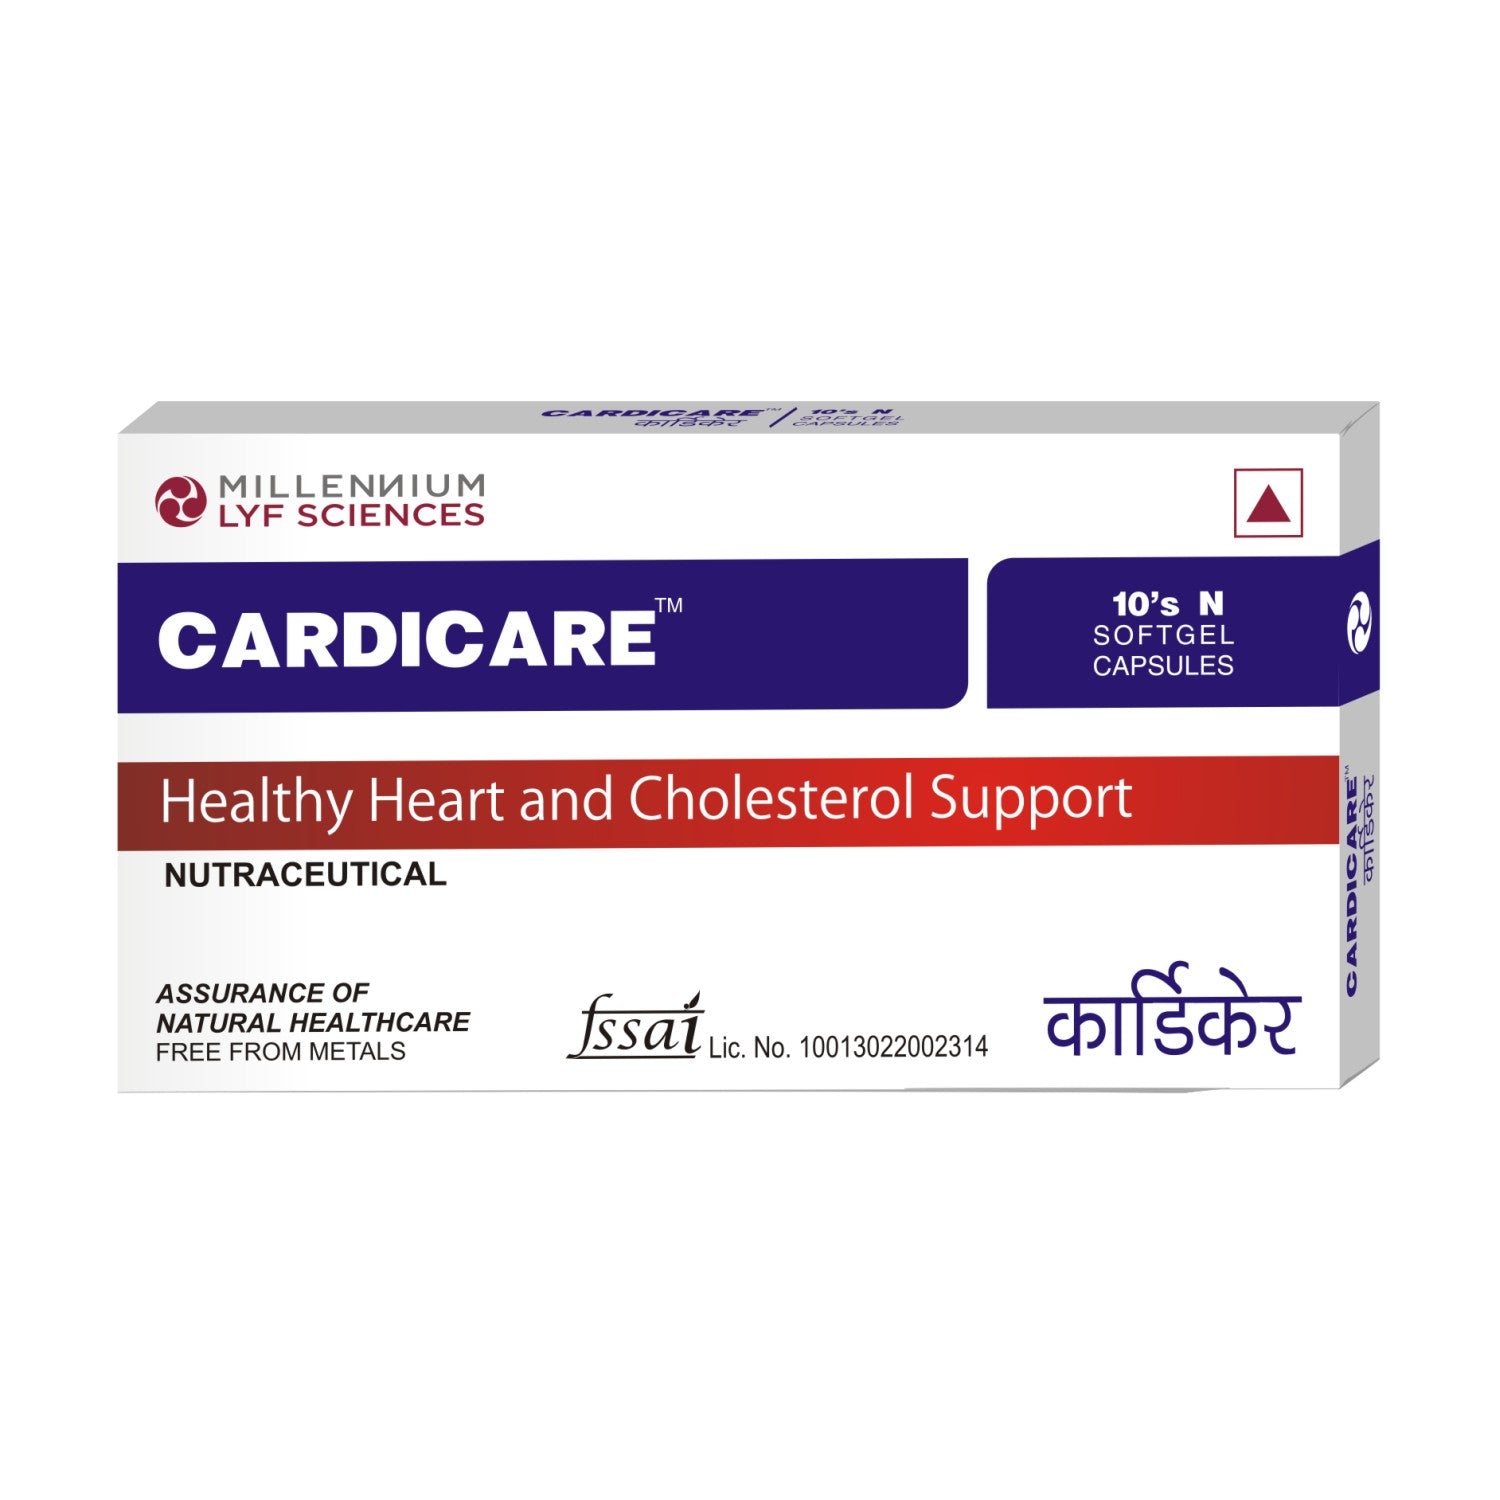 Cardicare Potent Proven Natural Nutraceuticals for Cholesterol & Heart Health Supplement